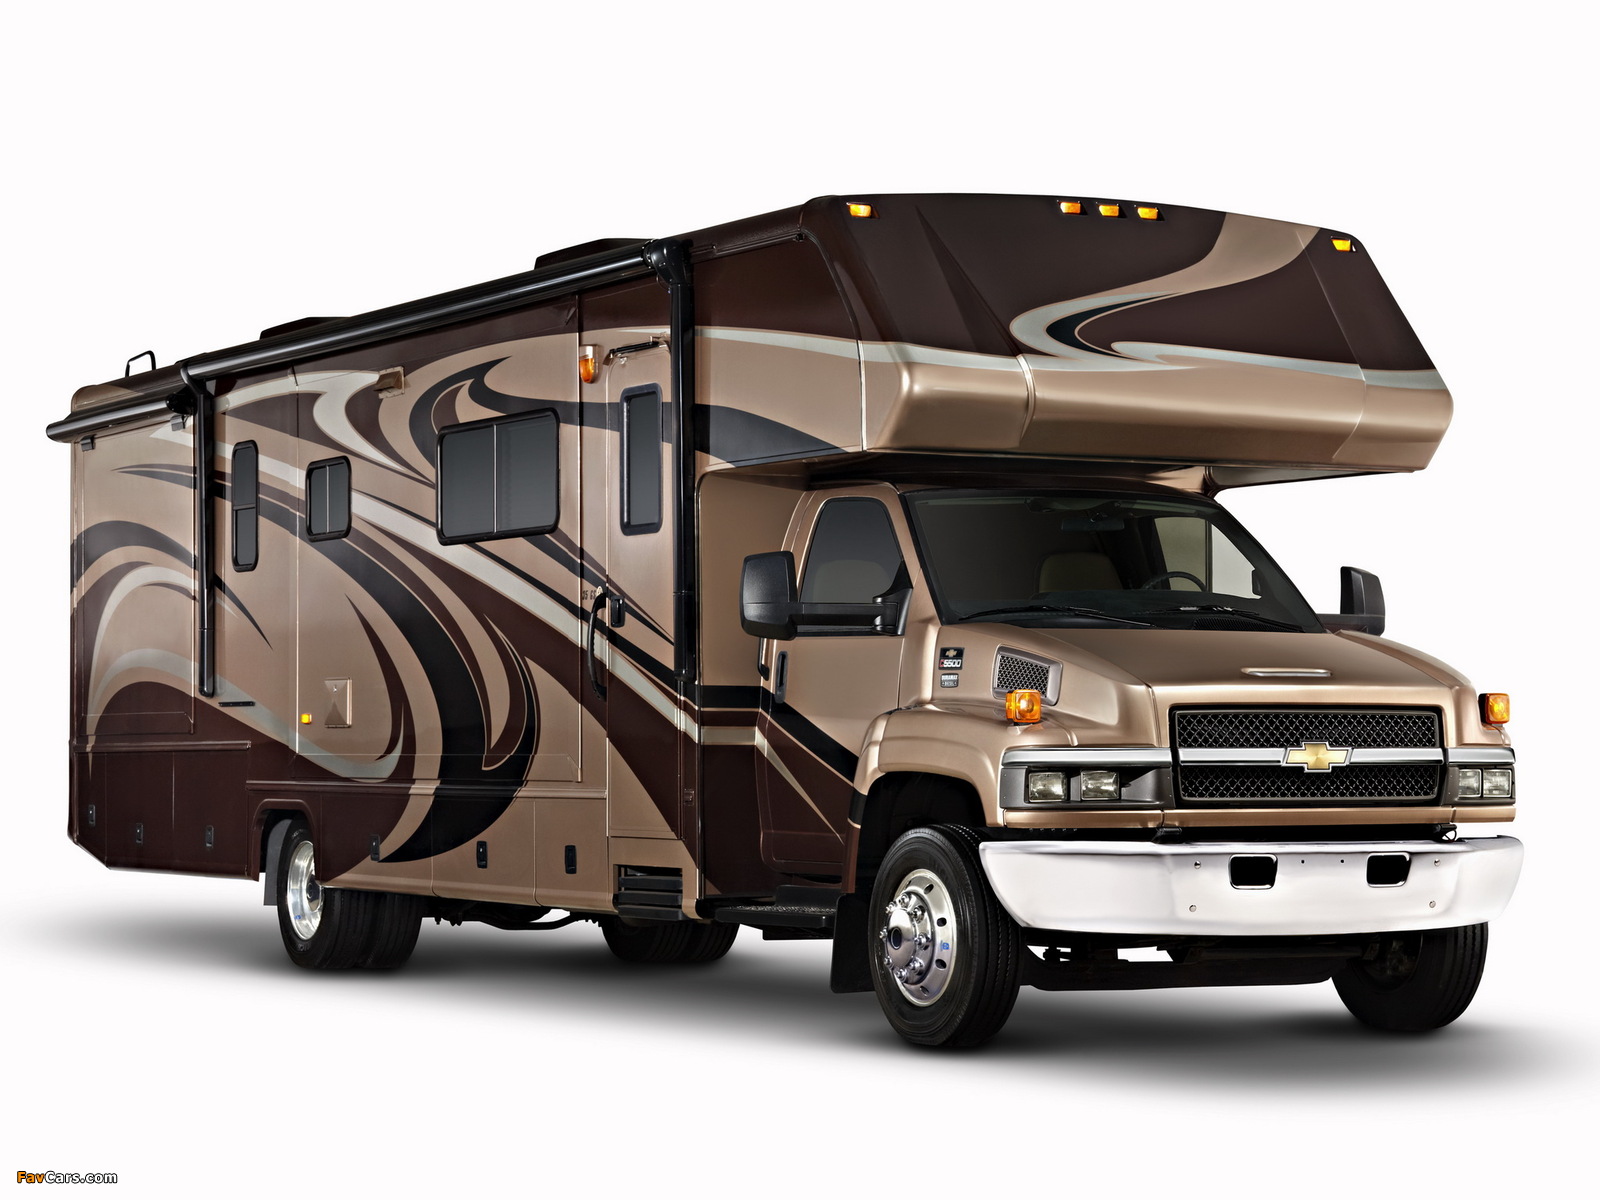 Images of Chevrolet Express C5500 Cutaway RV 2010 (1600 x 1200)